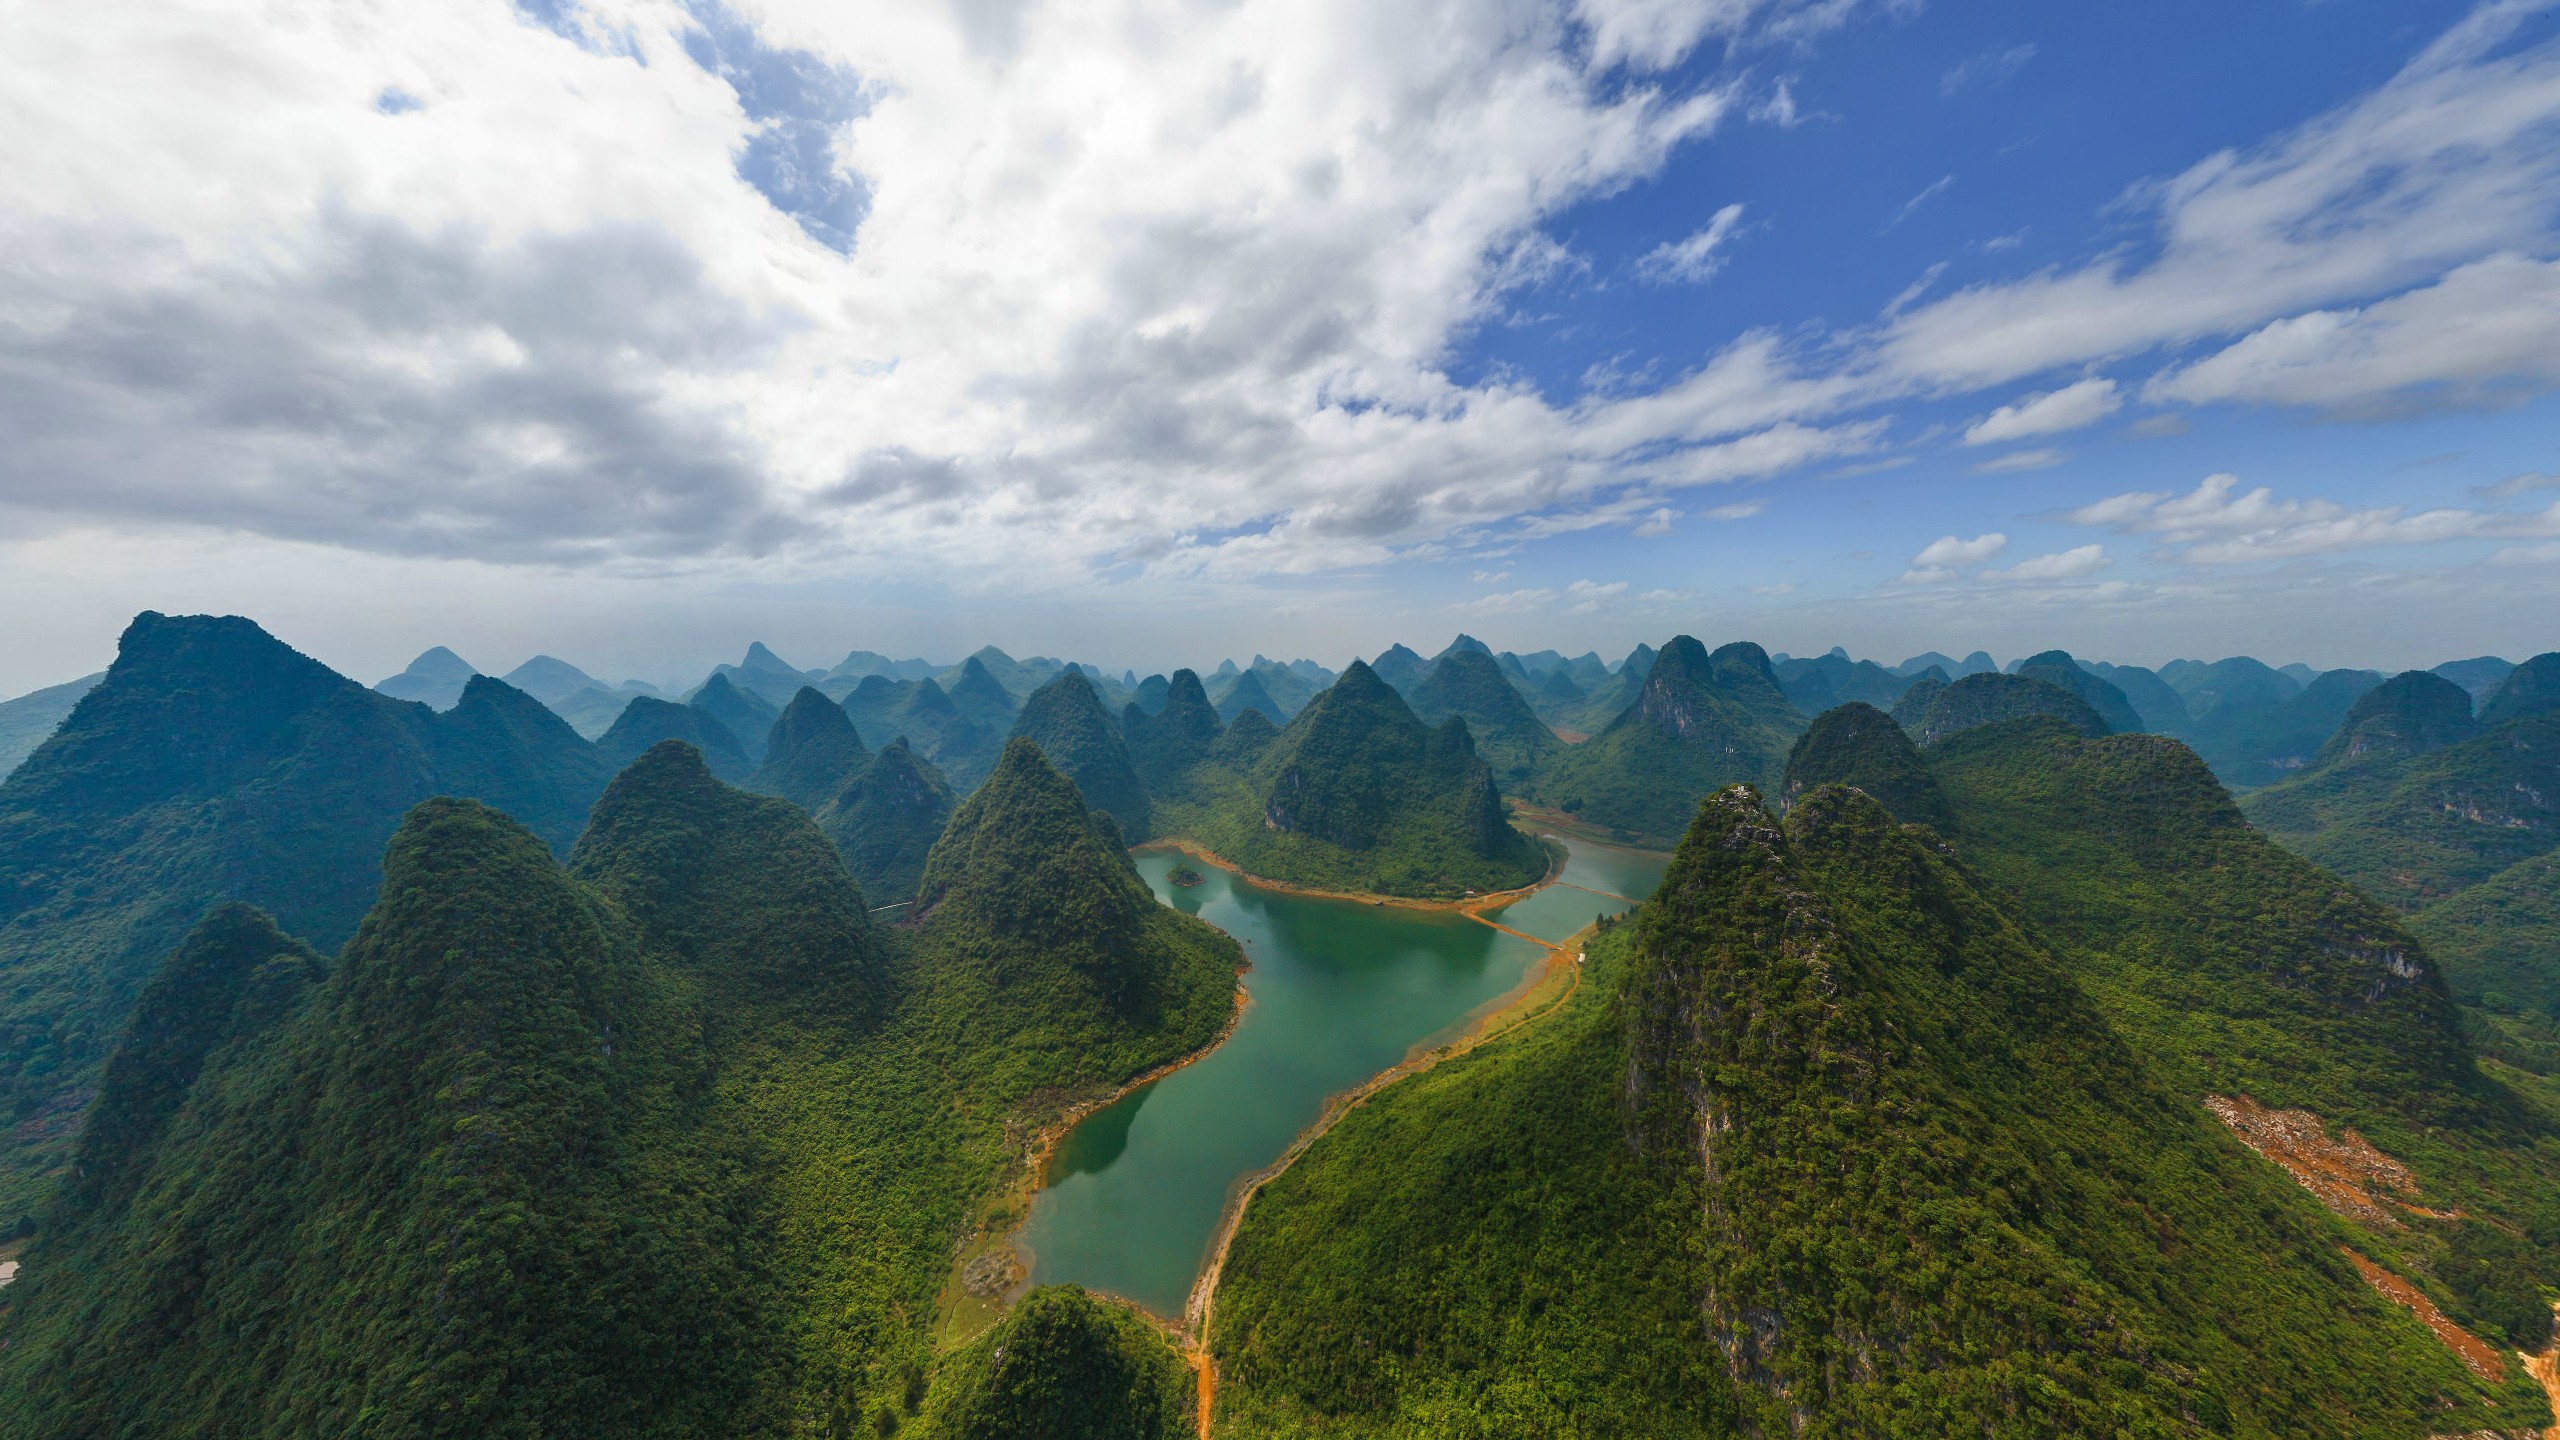 General 2560x1440 landscape China Guilin river hills nature sky clouds water aerial view Asia